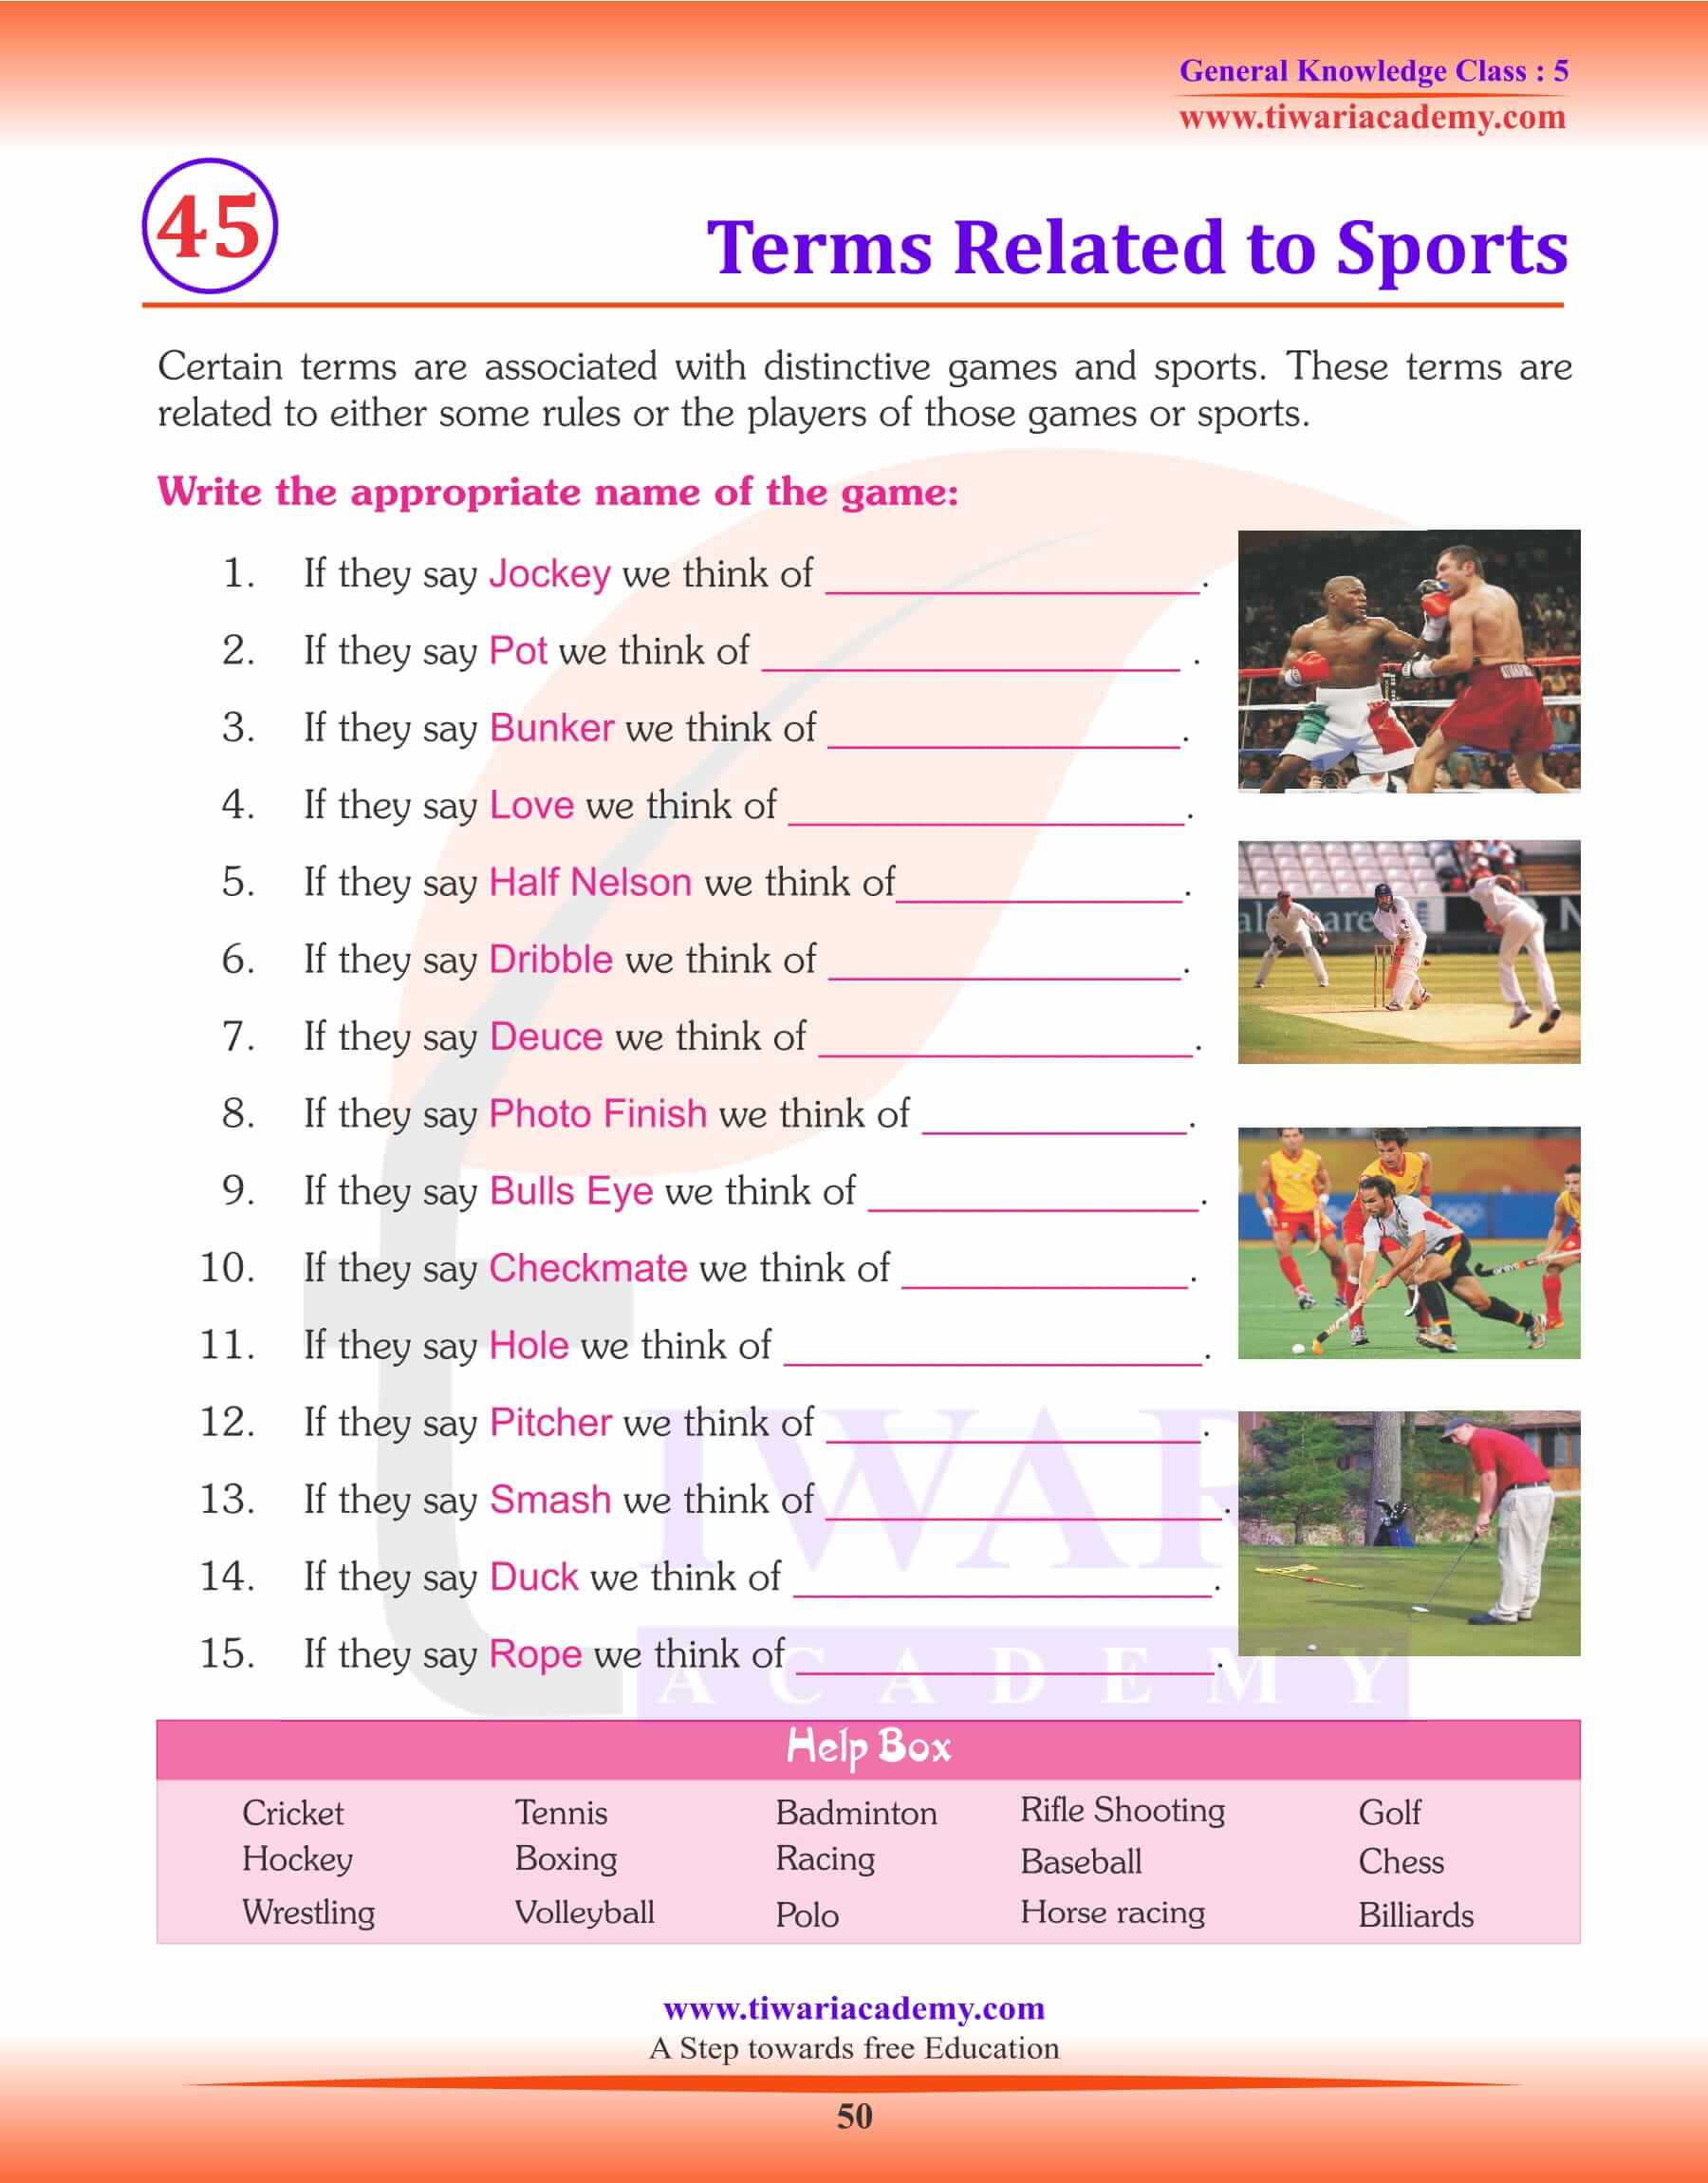 Terms Related to Sports